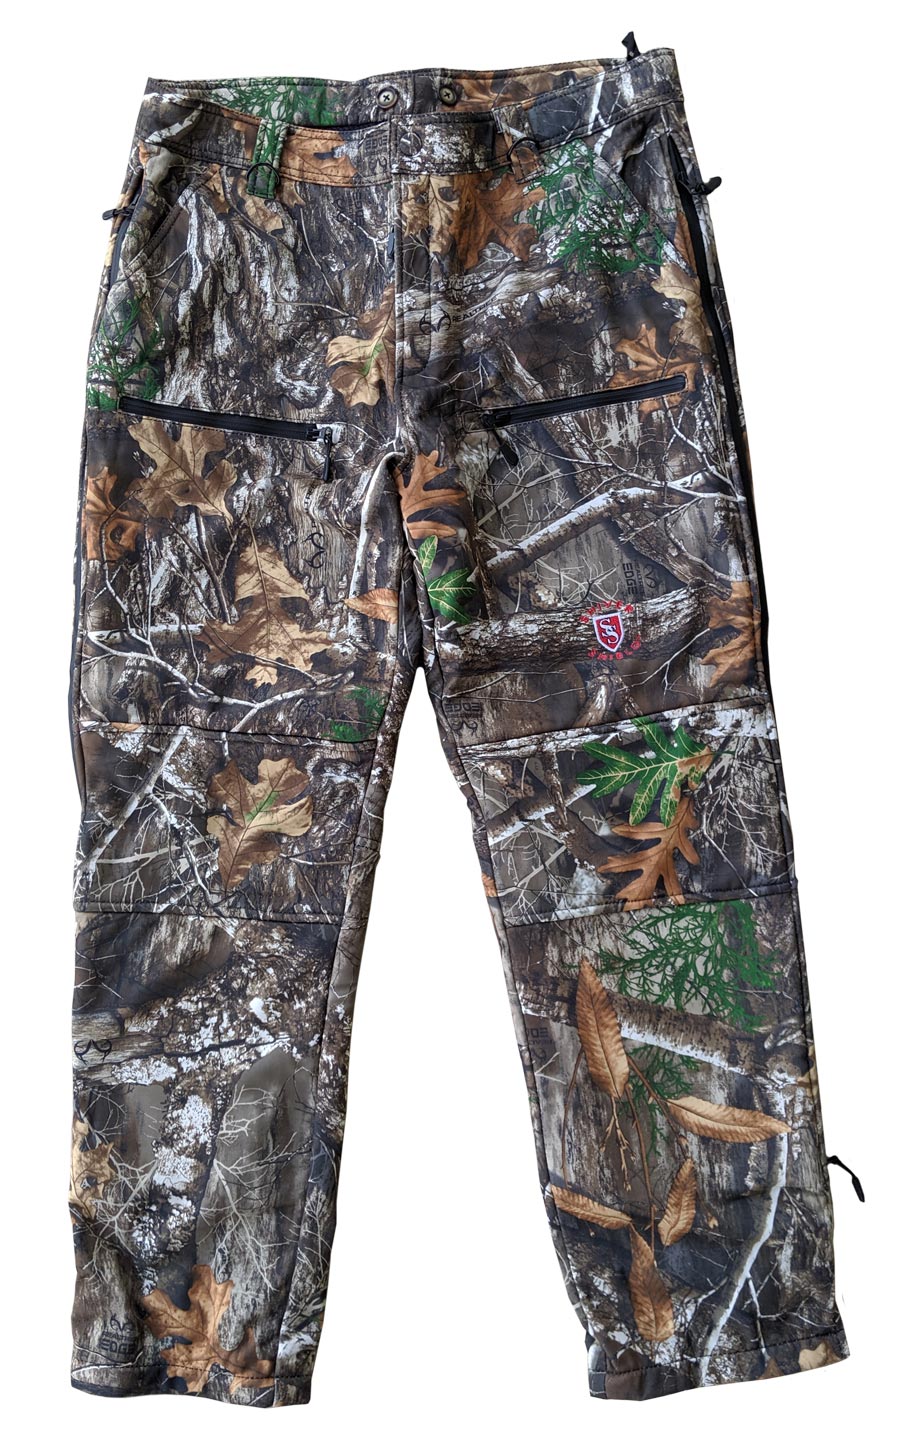 Realtree Men's Scent Factor Hunting Pant, Realtree Edge, Size